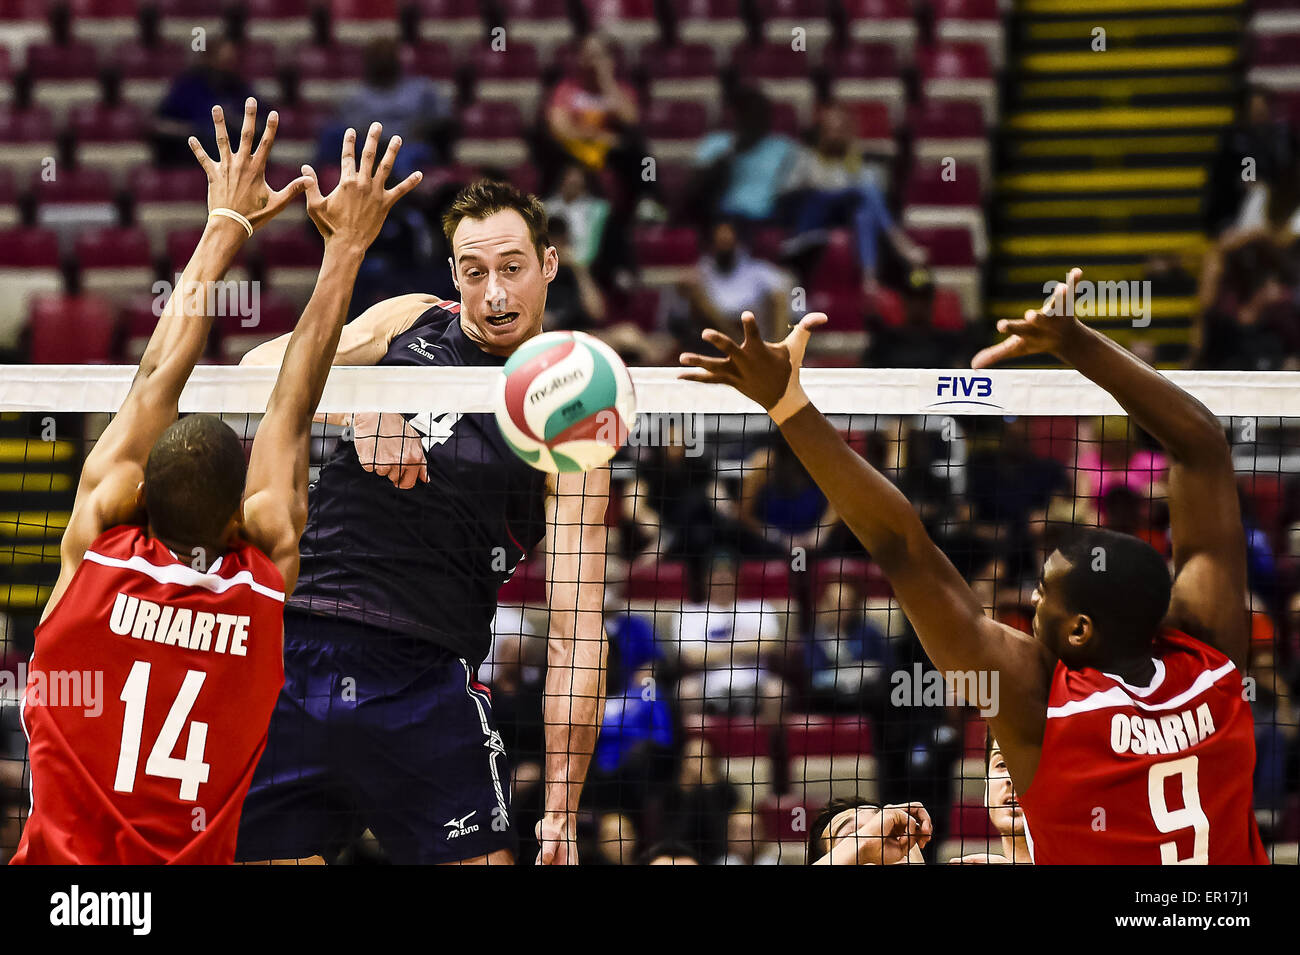 Detroit, Michigan, USA. 24th May, 2015. Daniel Lee #4 (USA) spikes the ball during a NORCECA qualifying game between Cuba and USA. USA won the game in three sets.USA advances to the World Cup in Japan for a chance qualify for the 2016 Olympics in Rio de Janeiro. © Scott Hasse/ZUMA Wire/ZUMAPRESS.com/Alamy Live News Stock Photo